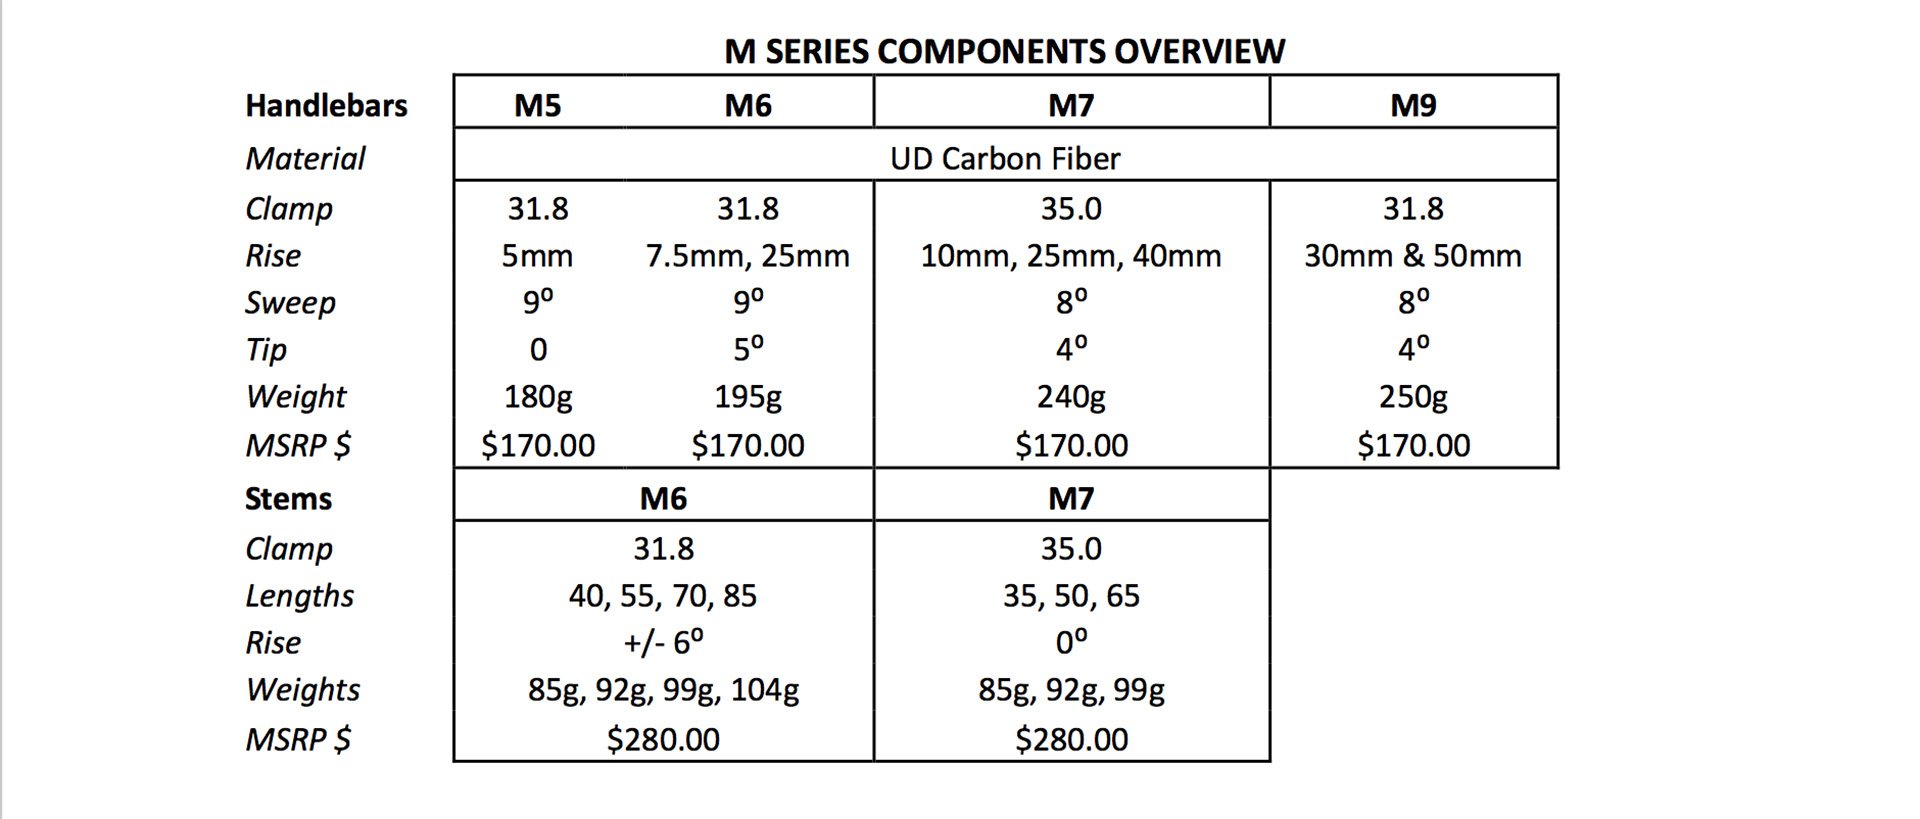 M Series bars and stem overview